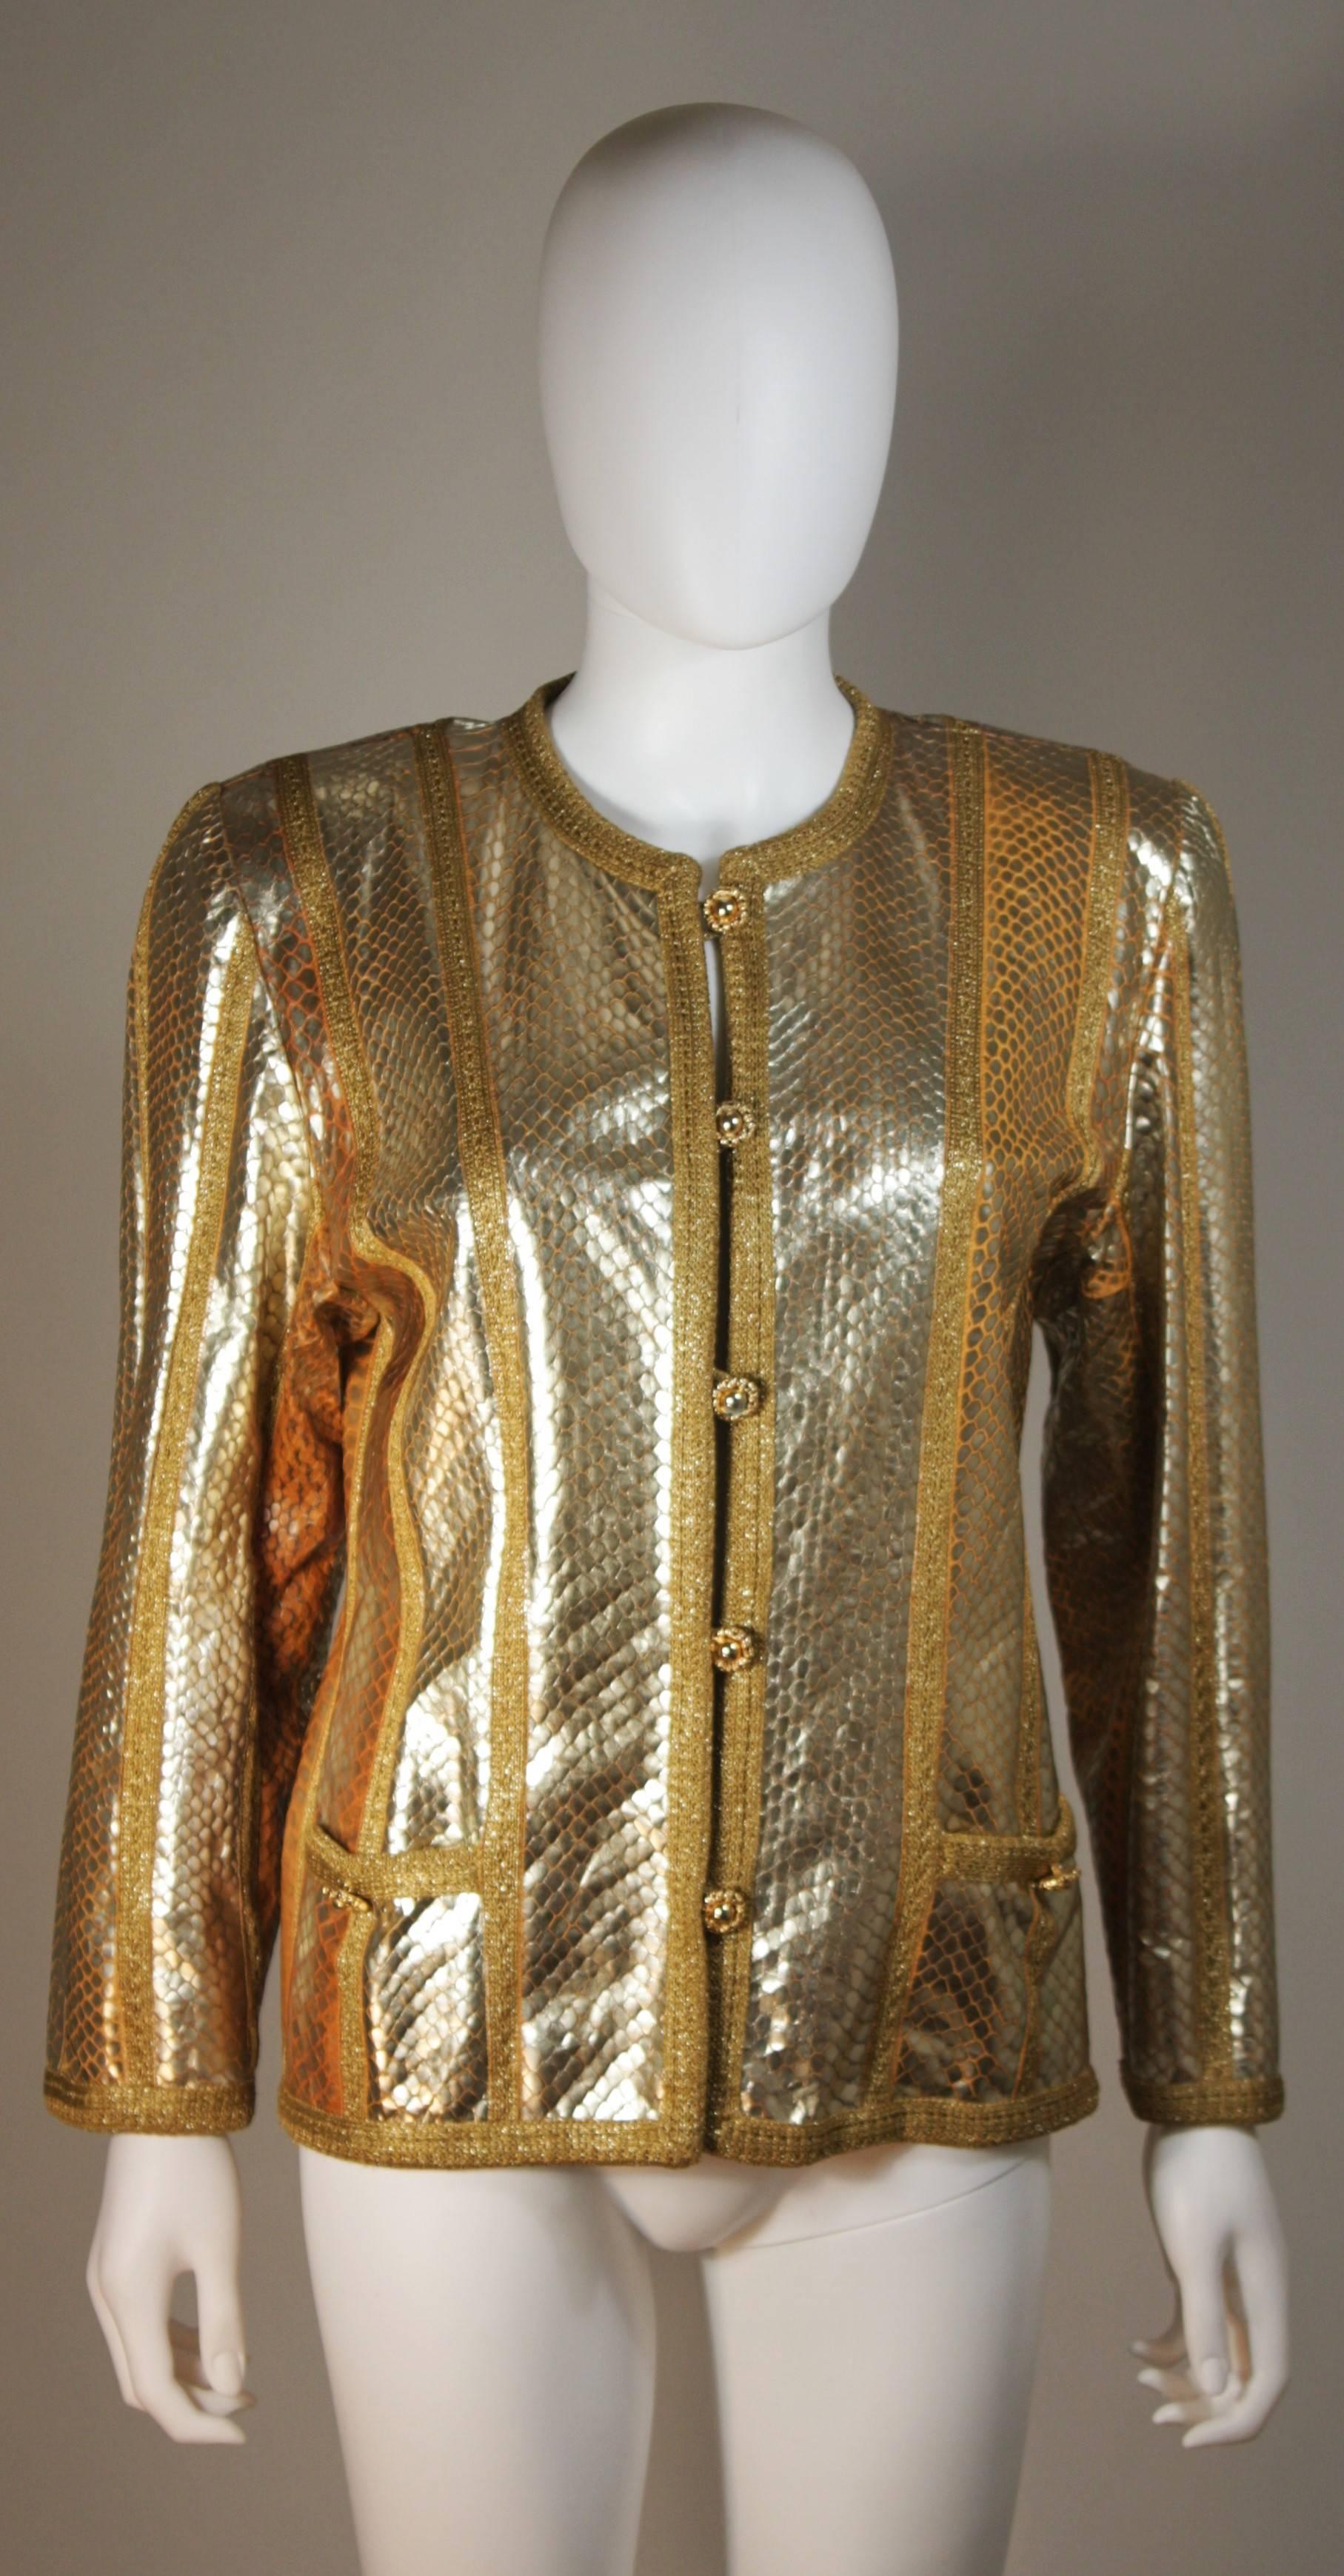 This Amen Wardy jacket is composed of a foiled snakeskin in a gold metallic hue. There are gold hued button closures at the center front. In excellent condition.

  **Please cross-reference measurements for personal accuracy. Size in description